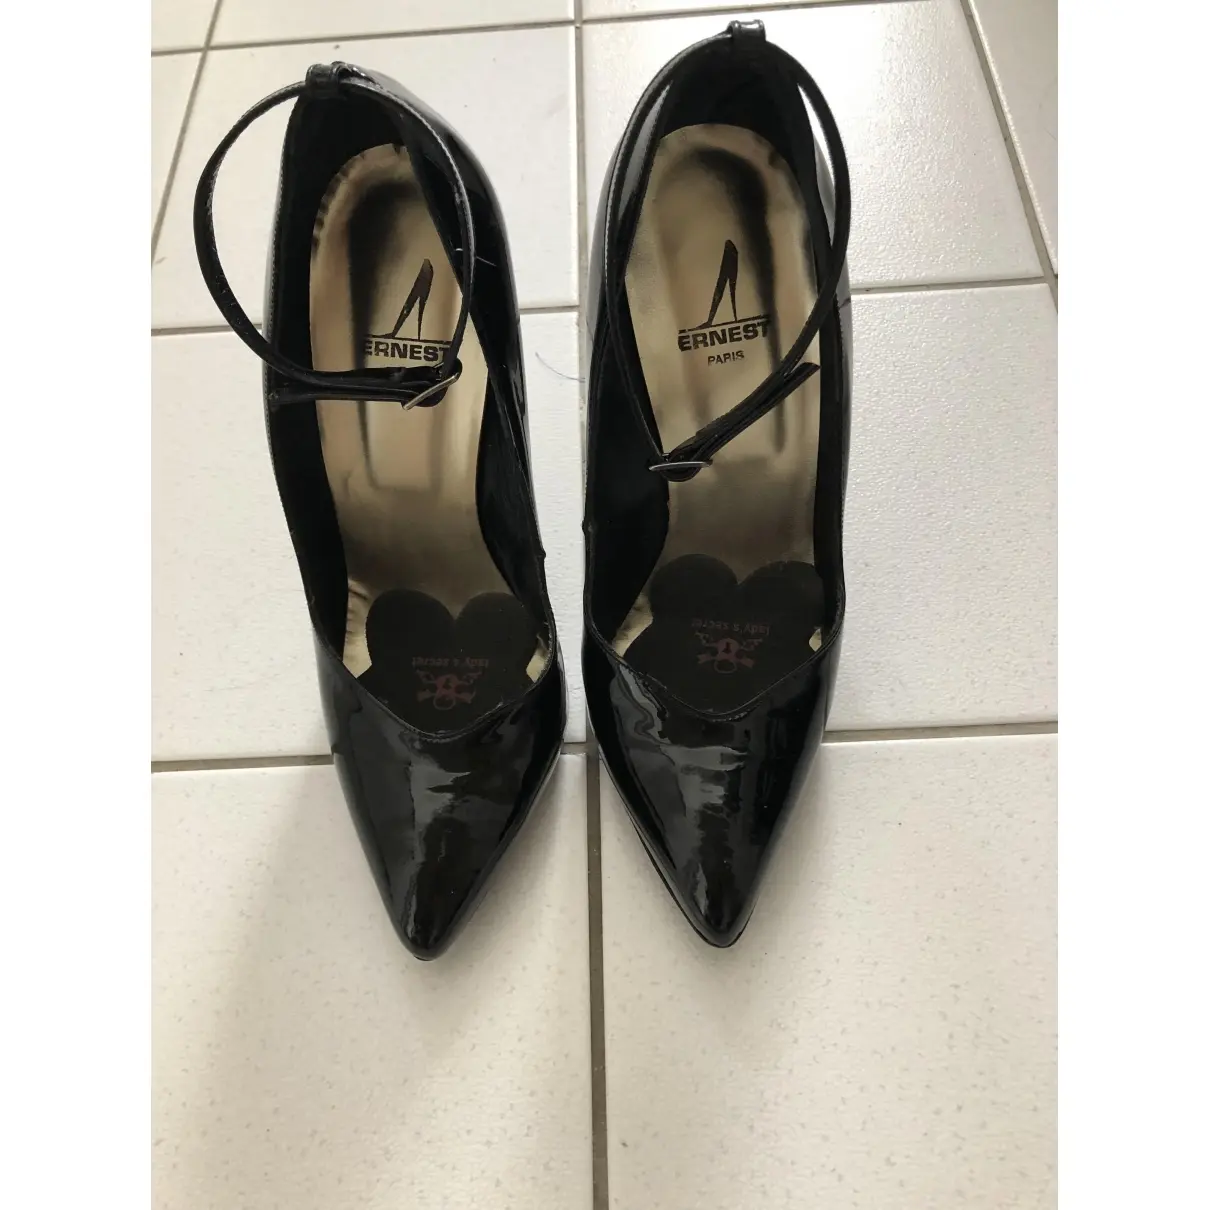 MAISON ERNEST Patent leather heels for sale